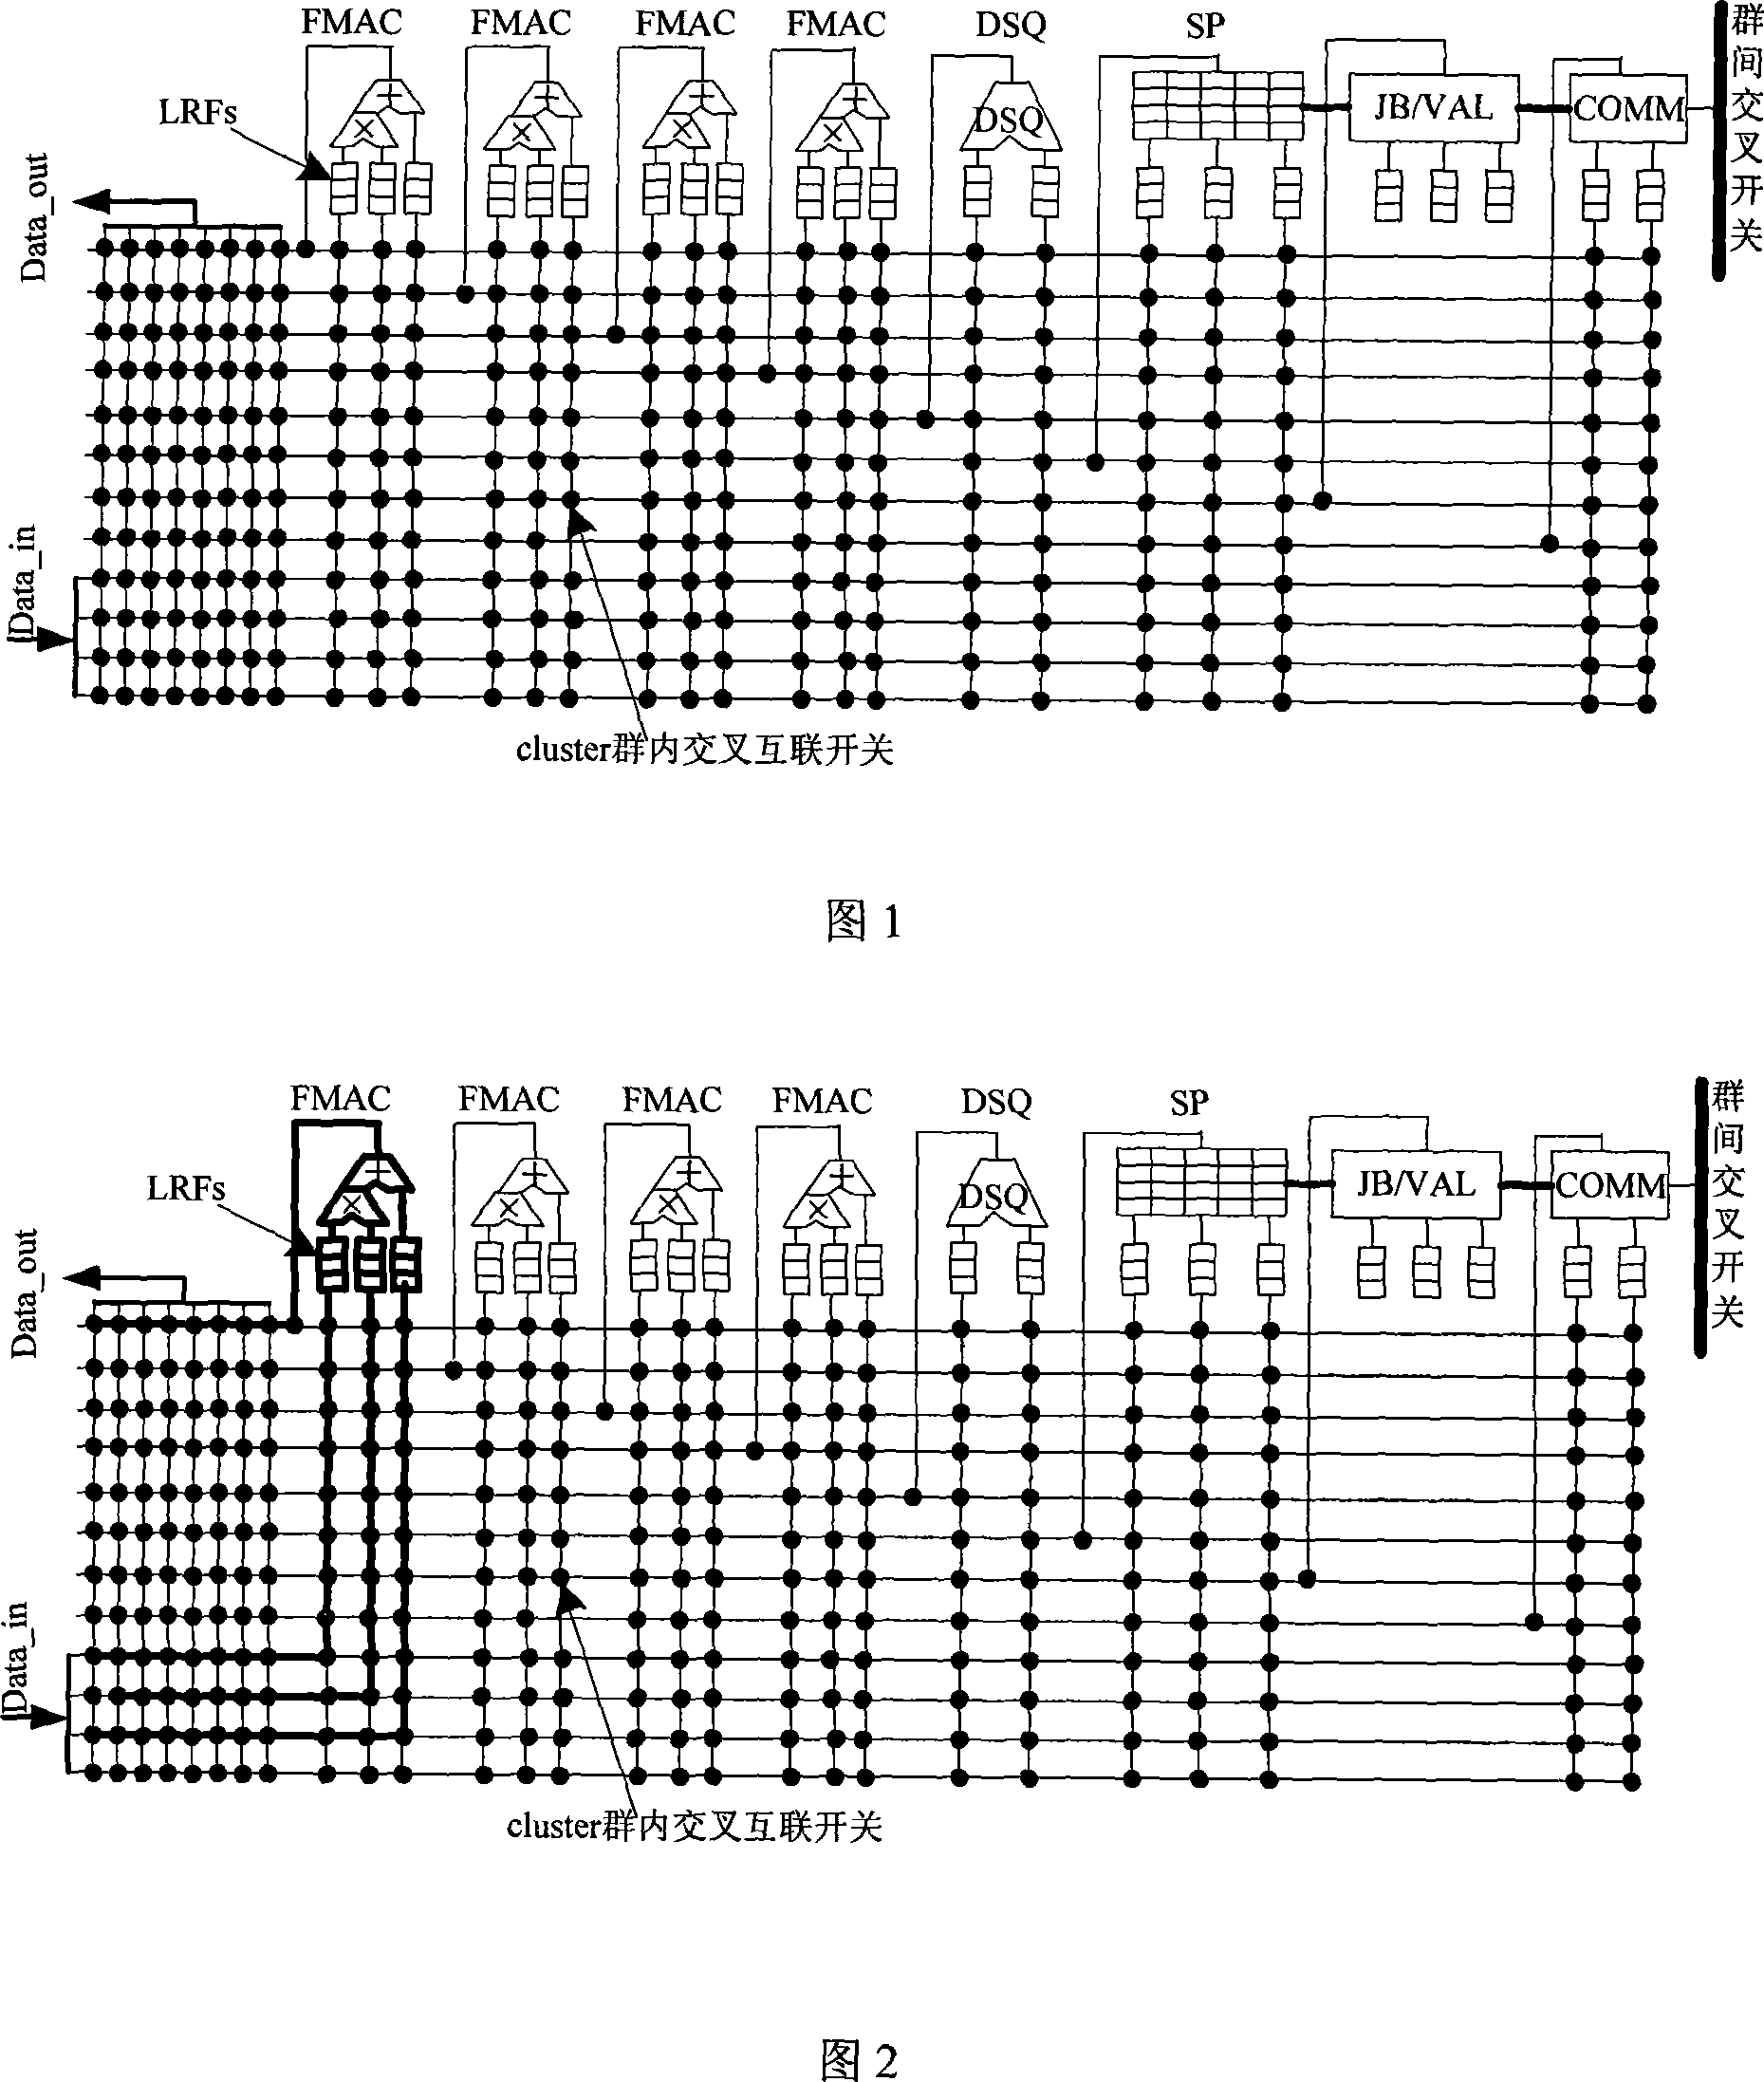 64 bit floating-point integer amalgamated arithmetic group capable of supporting local register and conditional execution